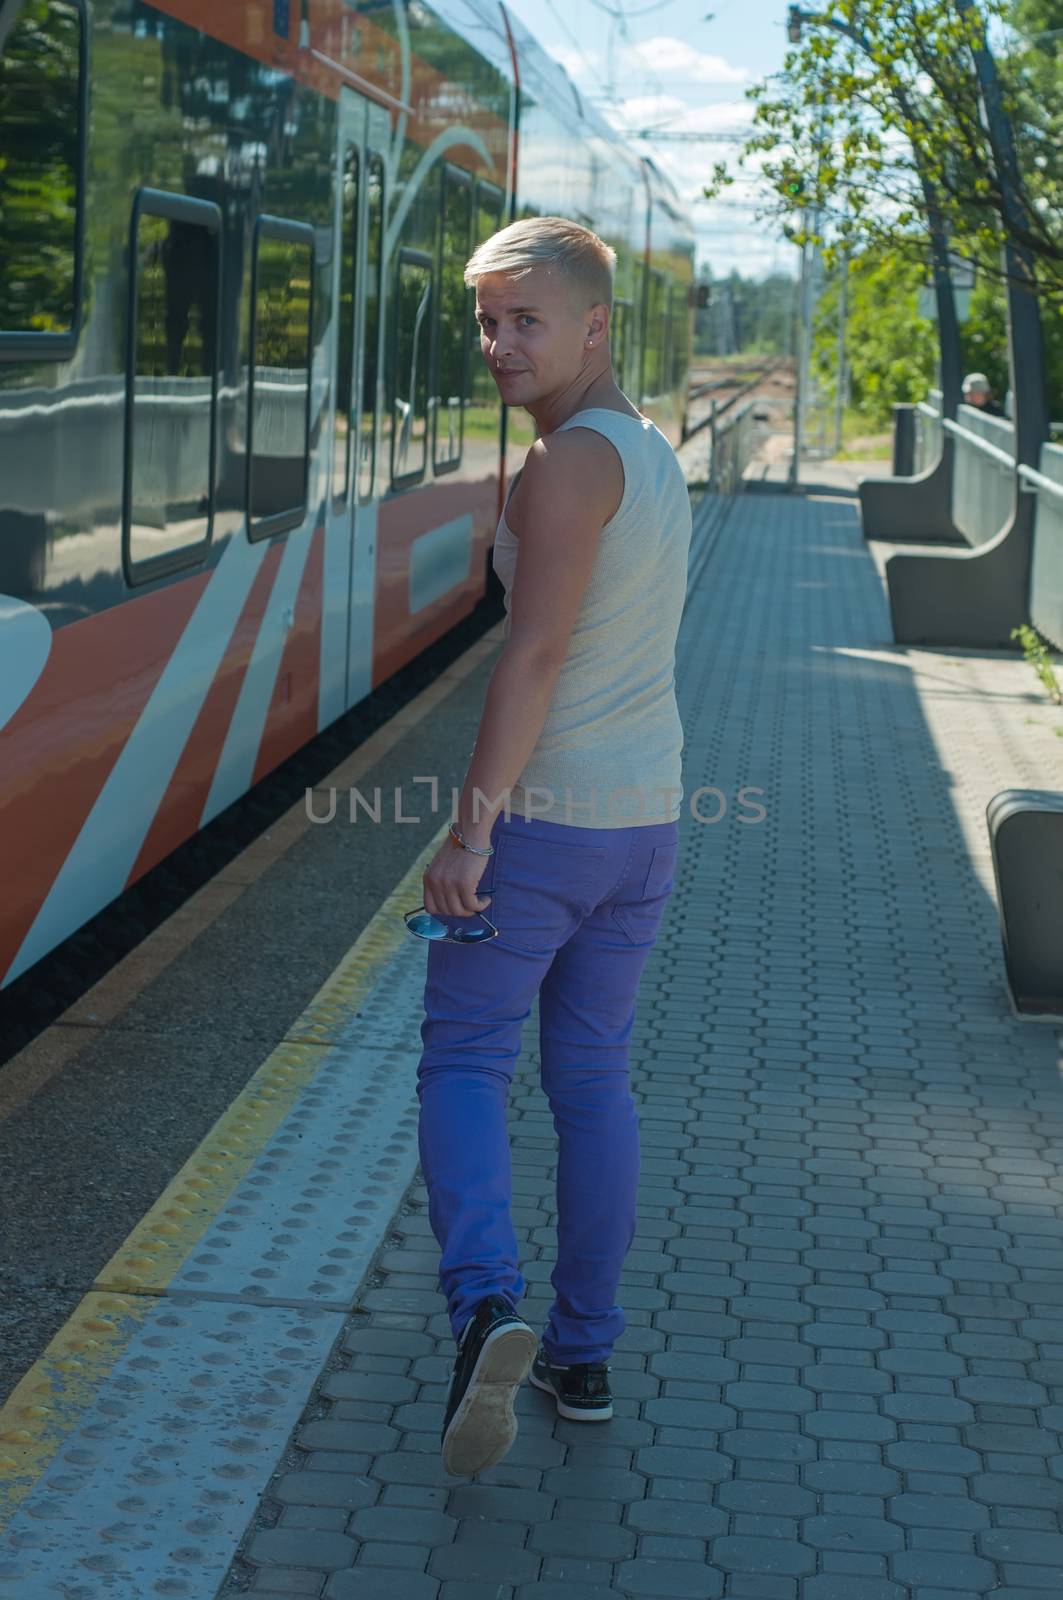 Man walking on the background of the train by anytka